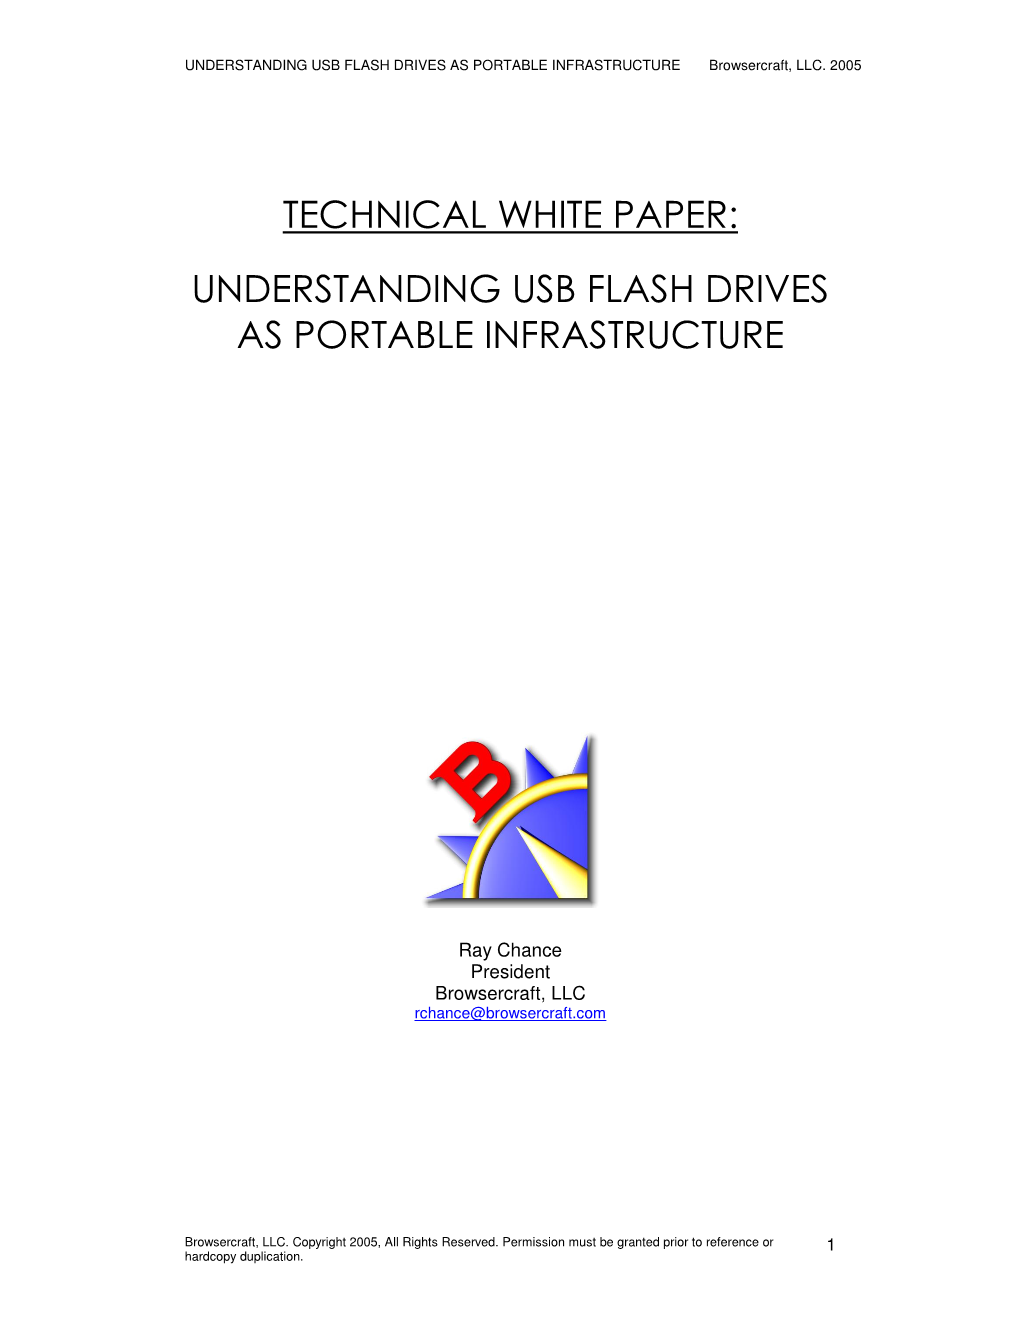 Technical White Paper: Understanding Usb Flash Drives As Portable Infrastructure